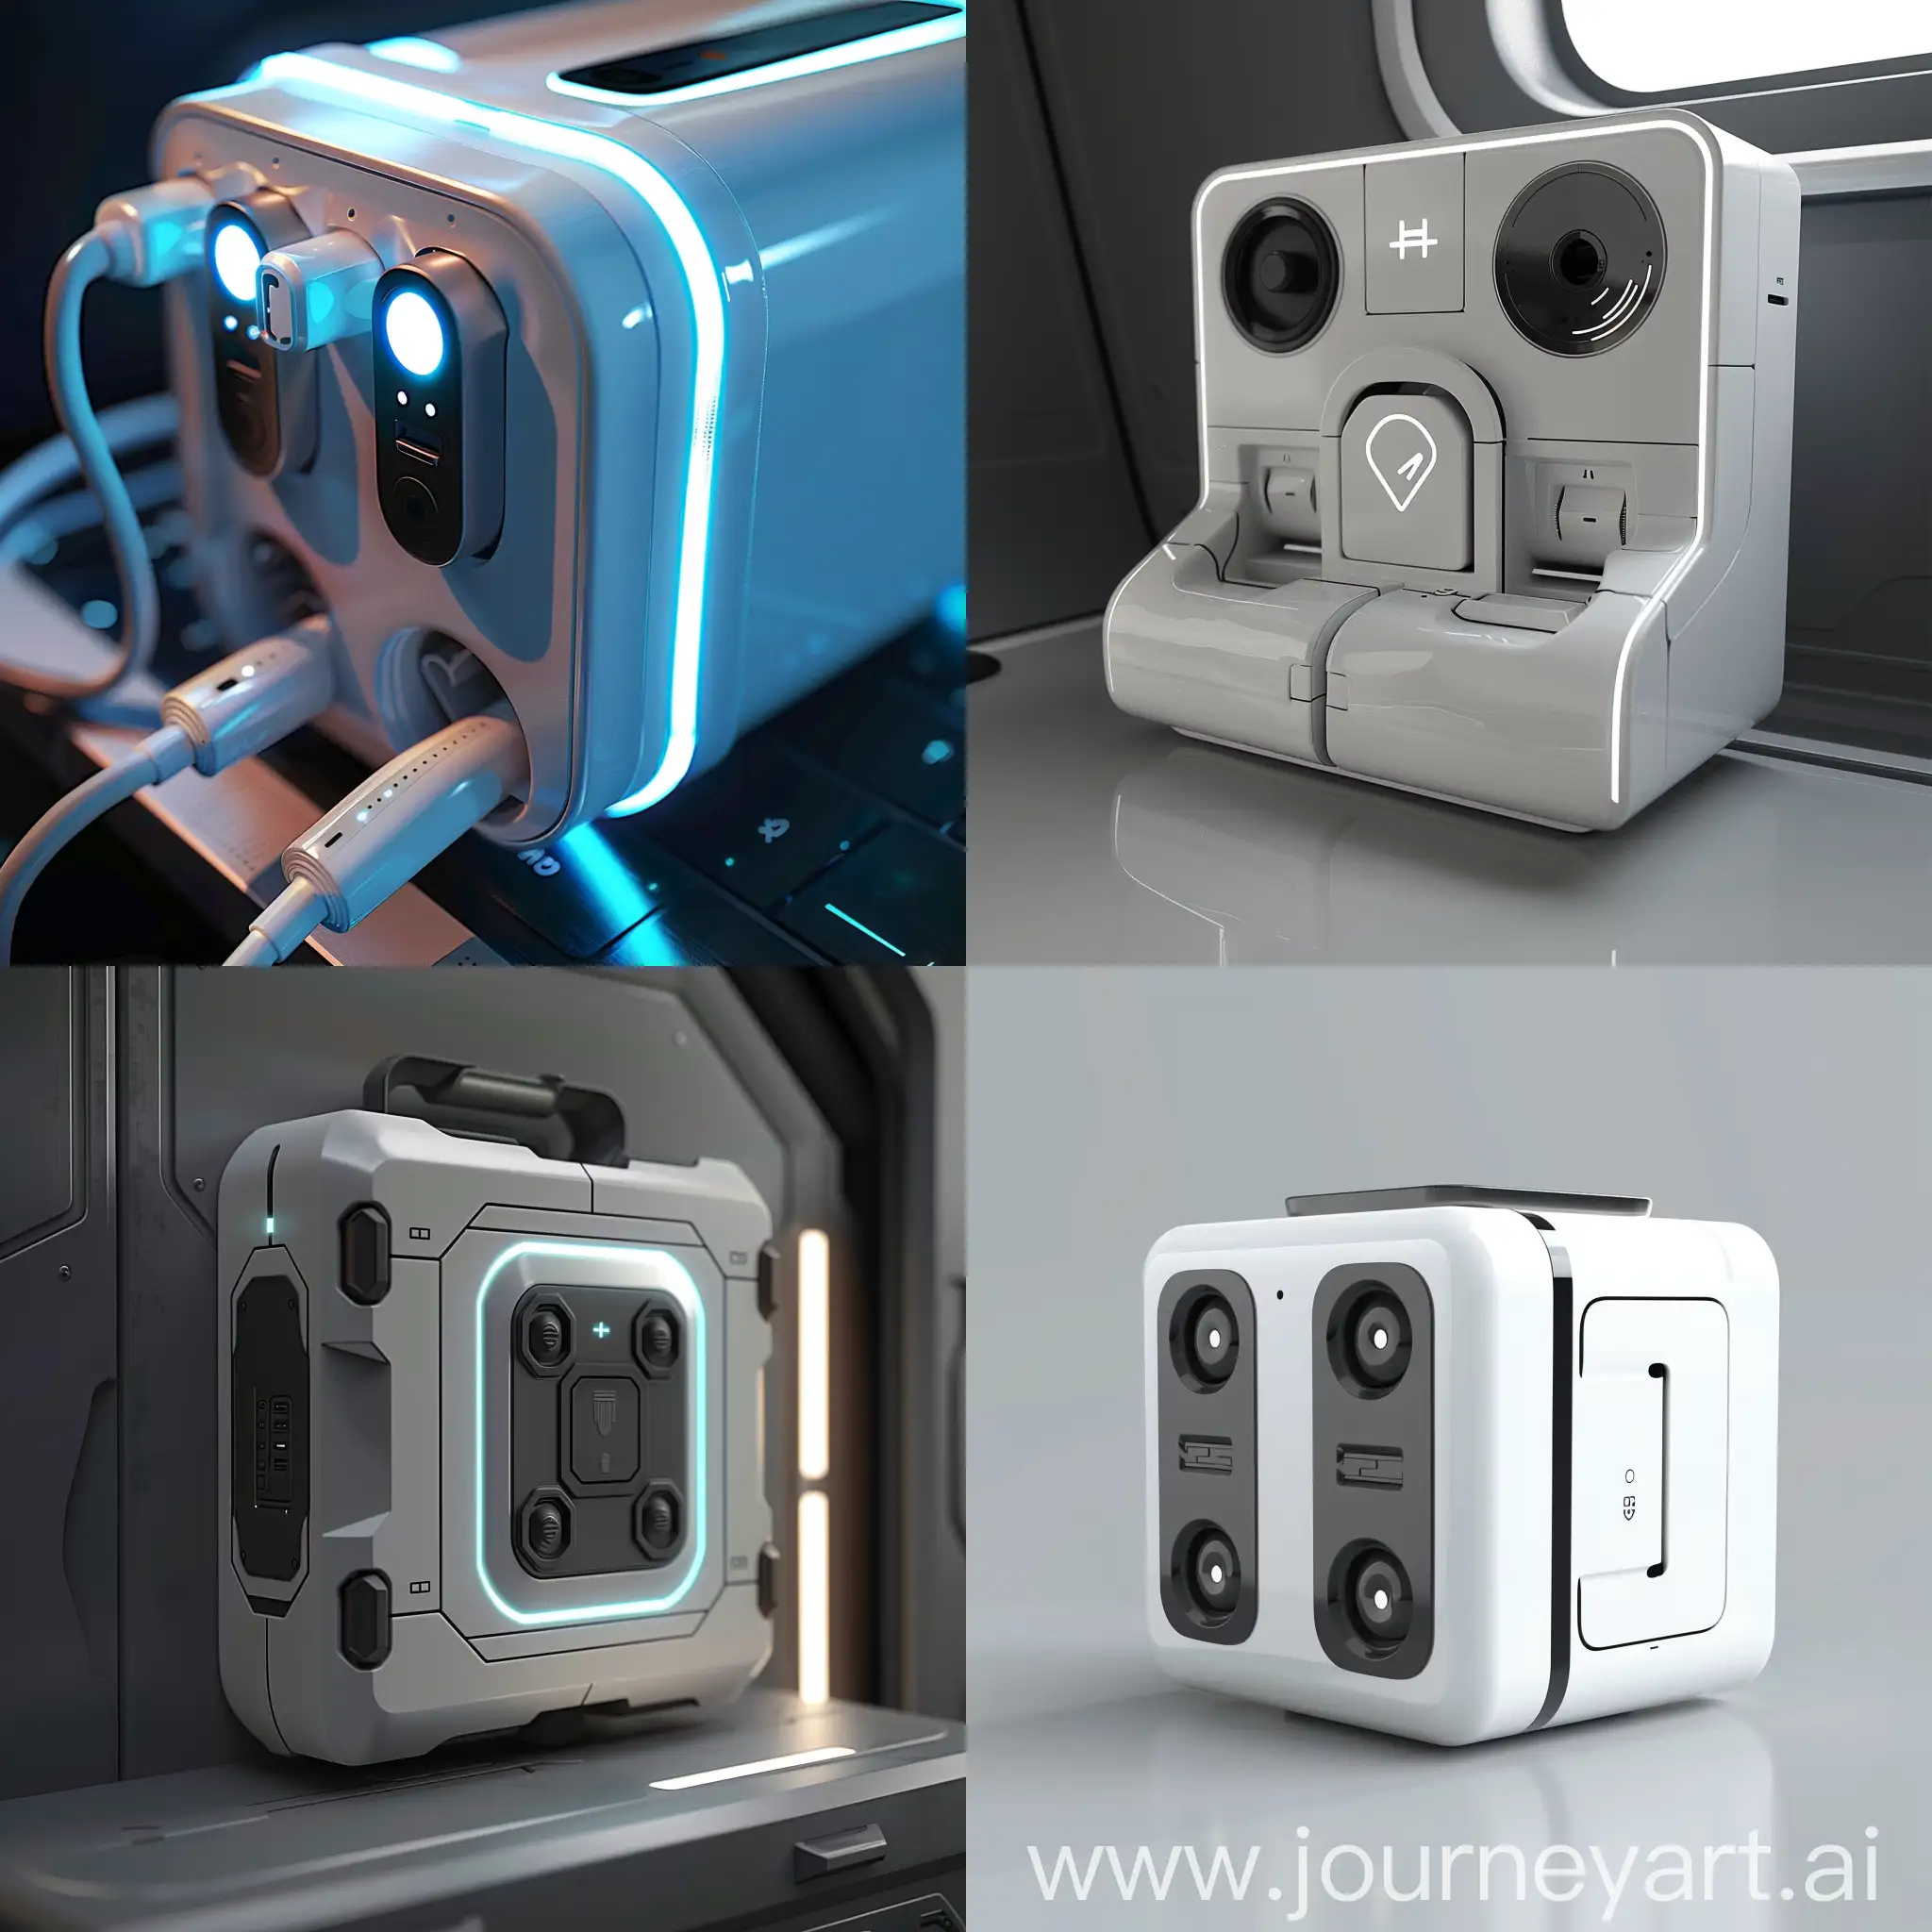 Advanced-SciFi-Travel-Adaptor-with-Modular-Design-and-Smart-Charging-Technology